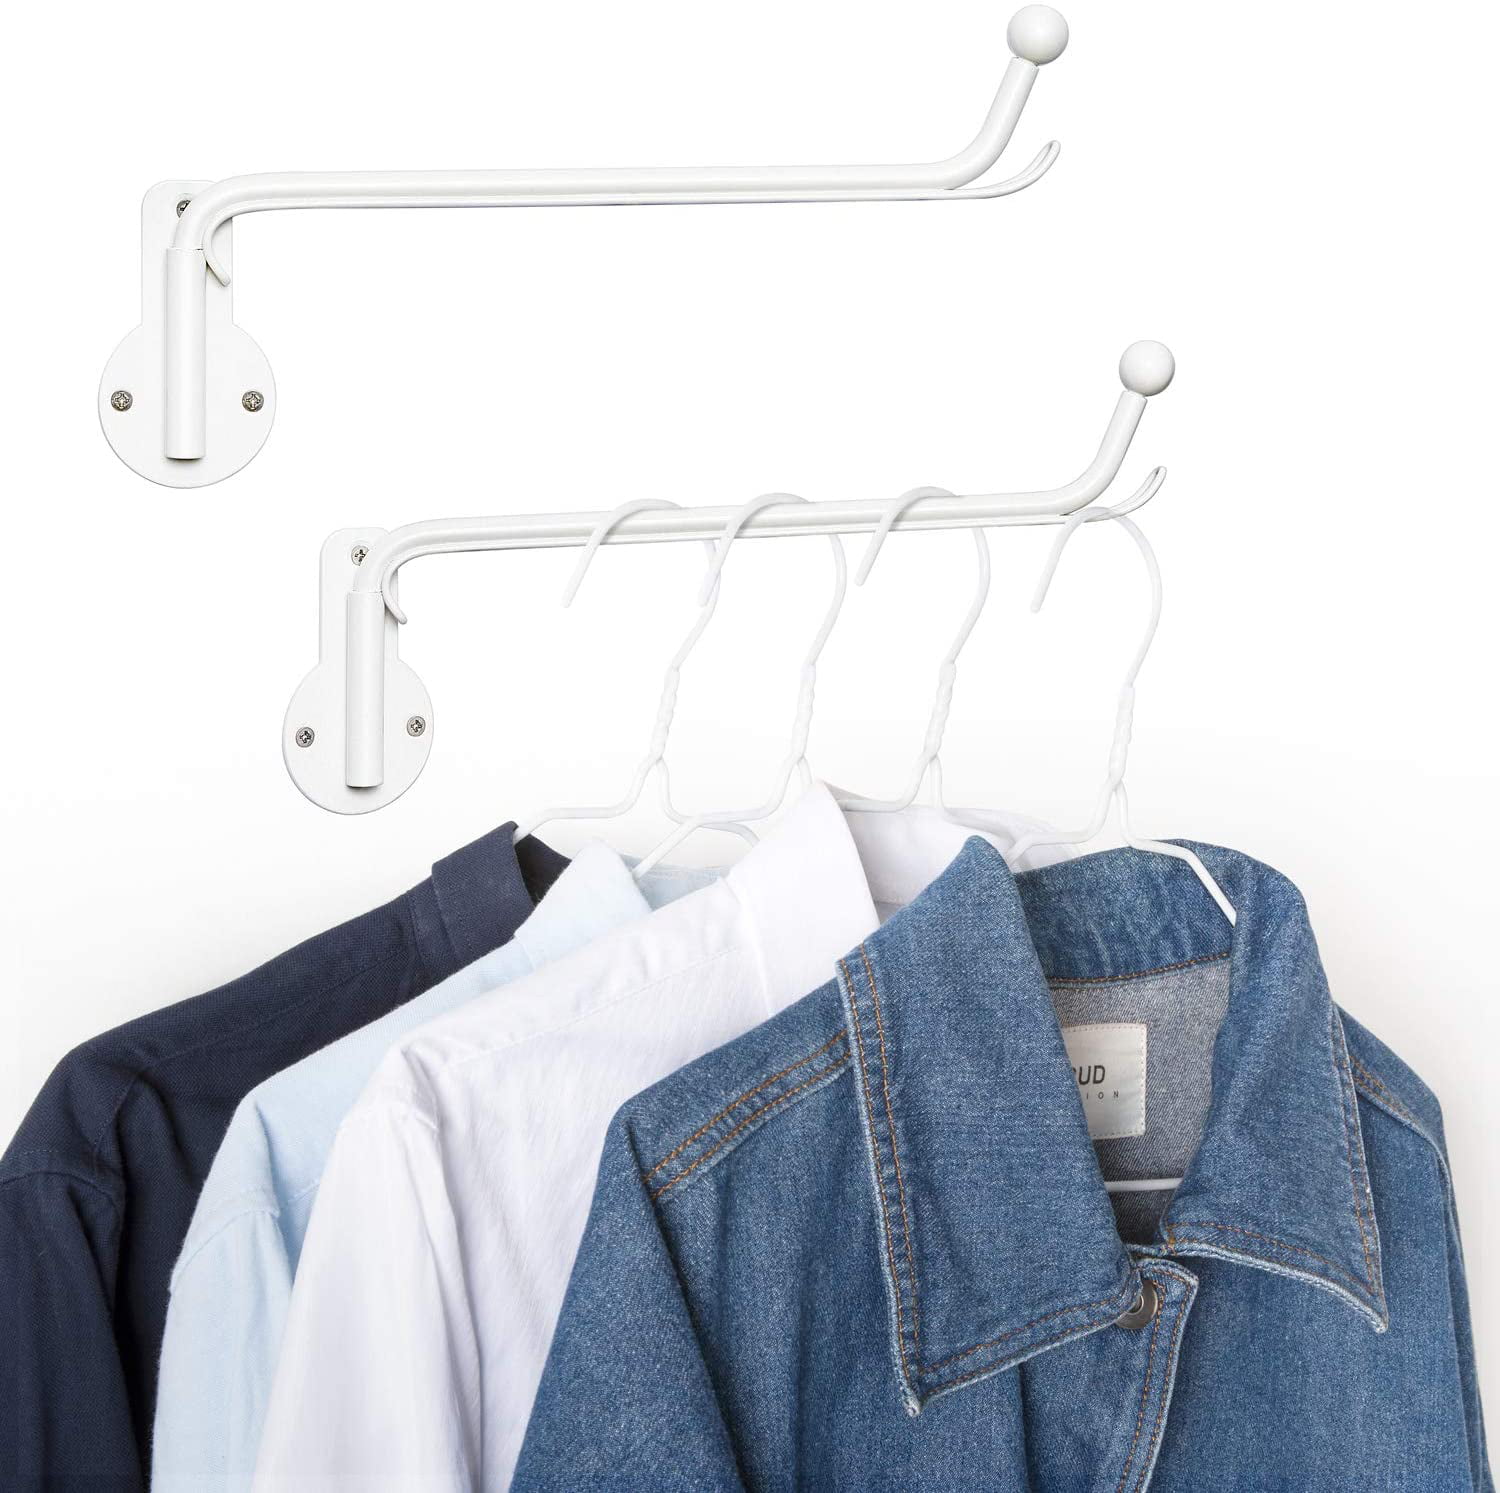 9" Hanger Rack For Drying Clothes 2pk Laundry Over the Door Hook Hang Shirts 